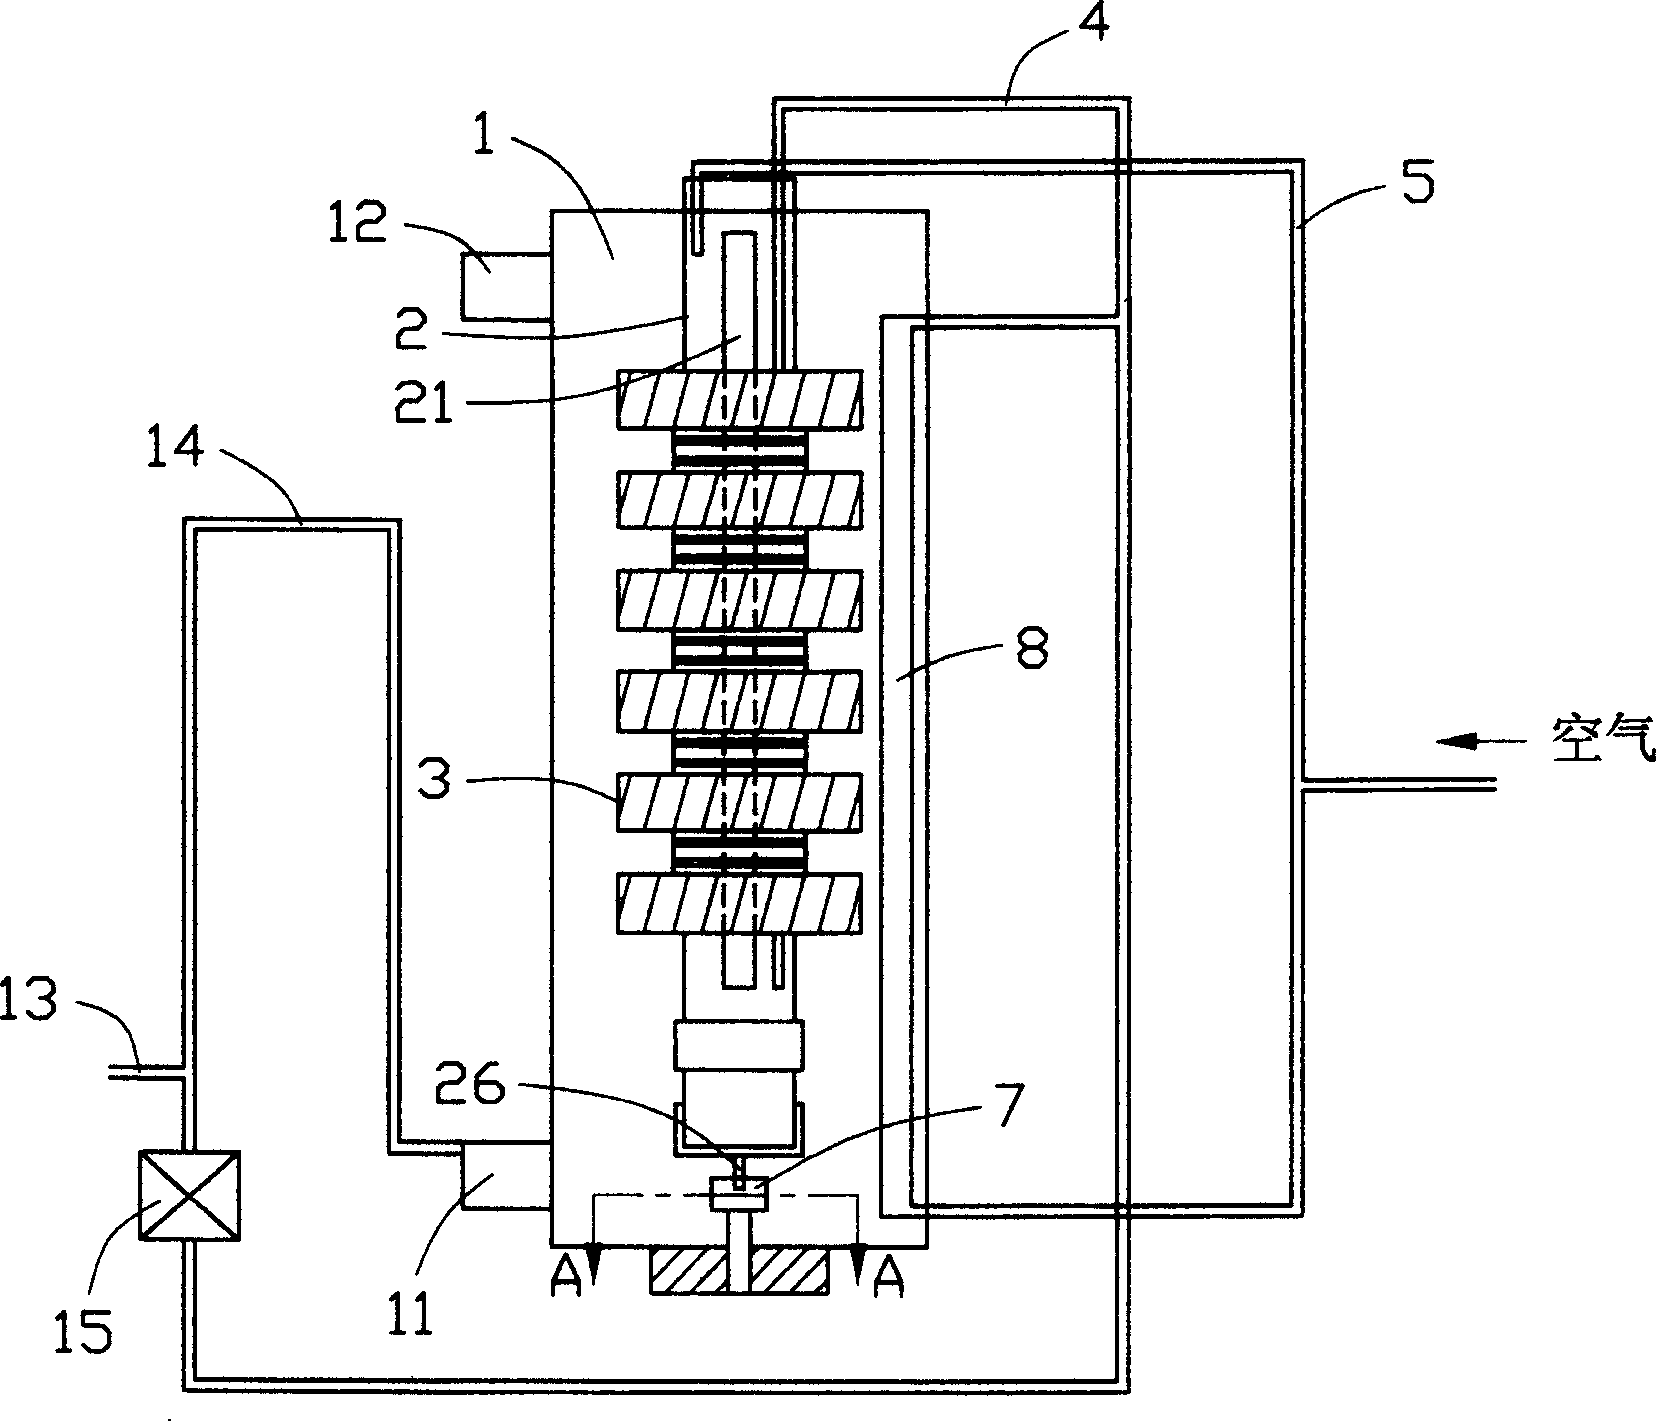 Ultraviolet water purifying apparatus